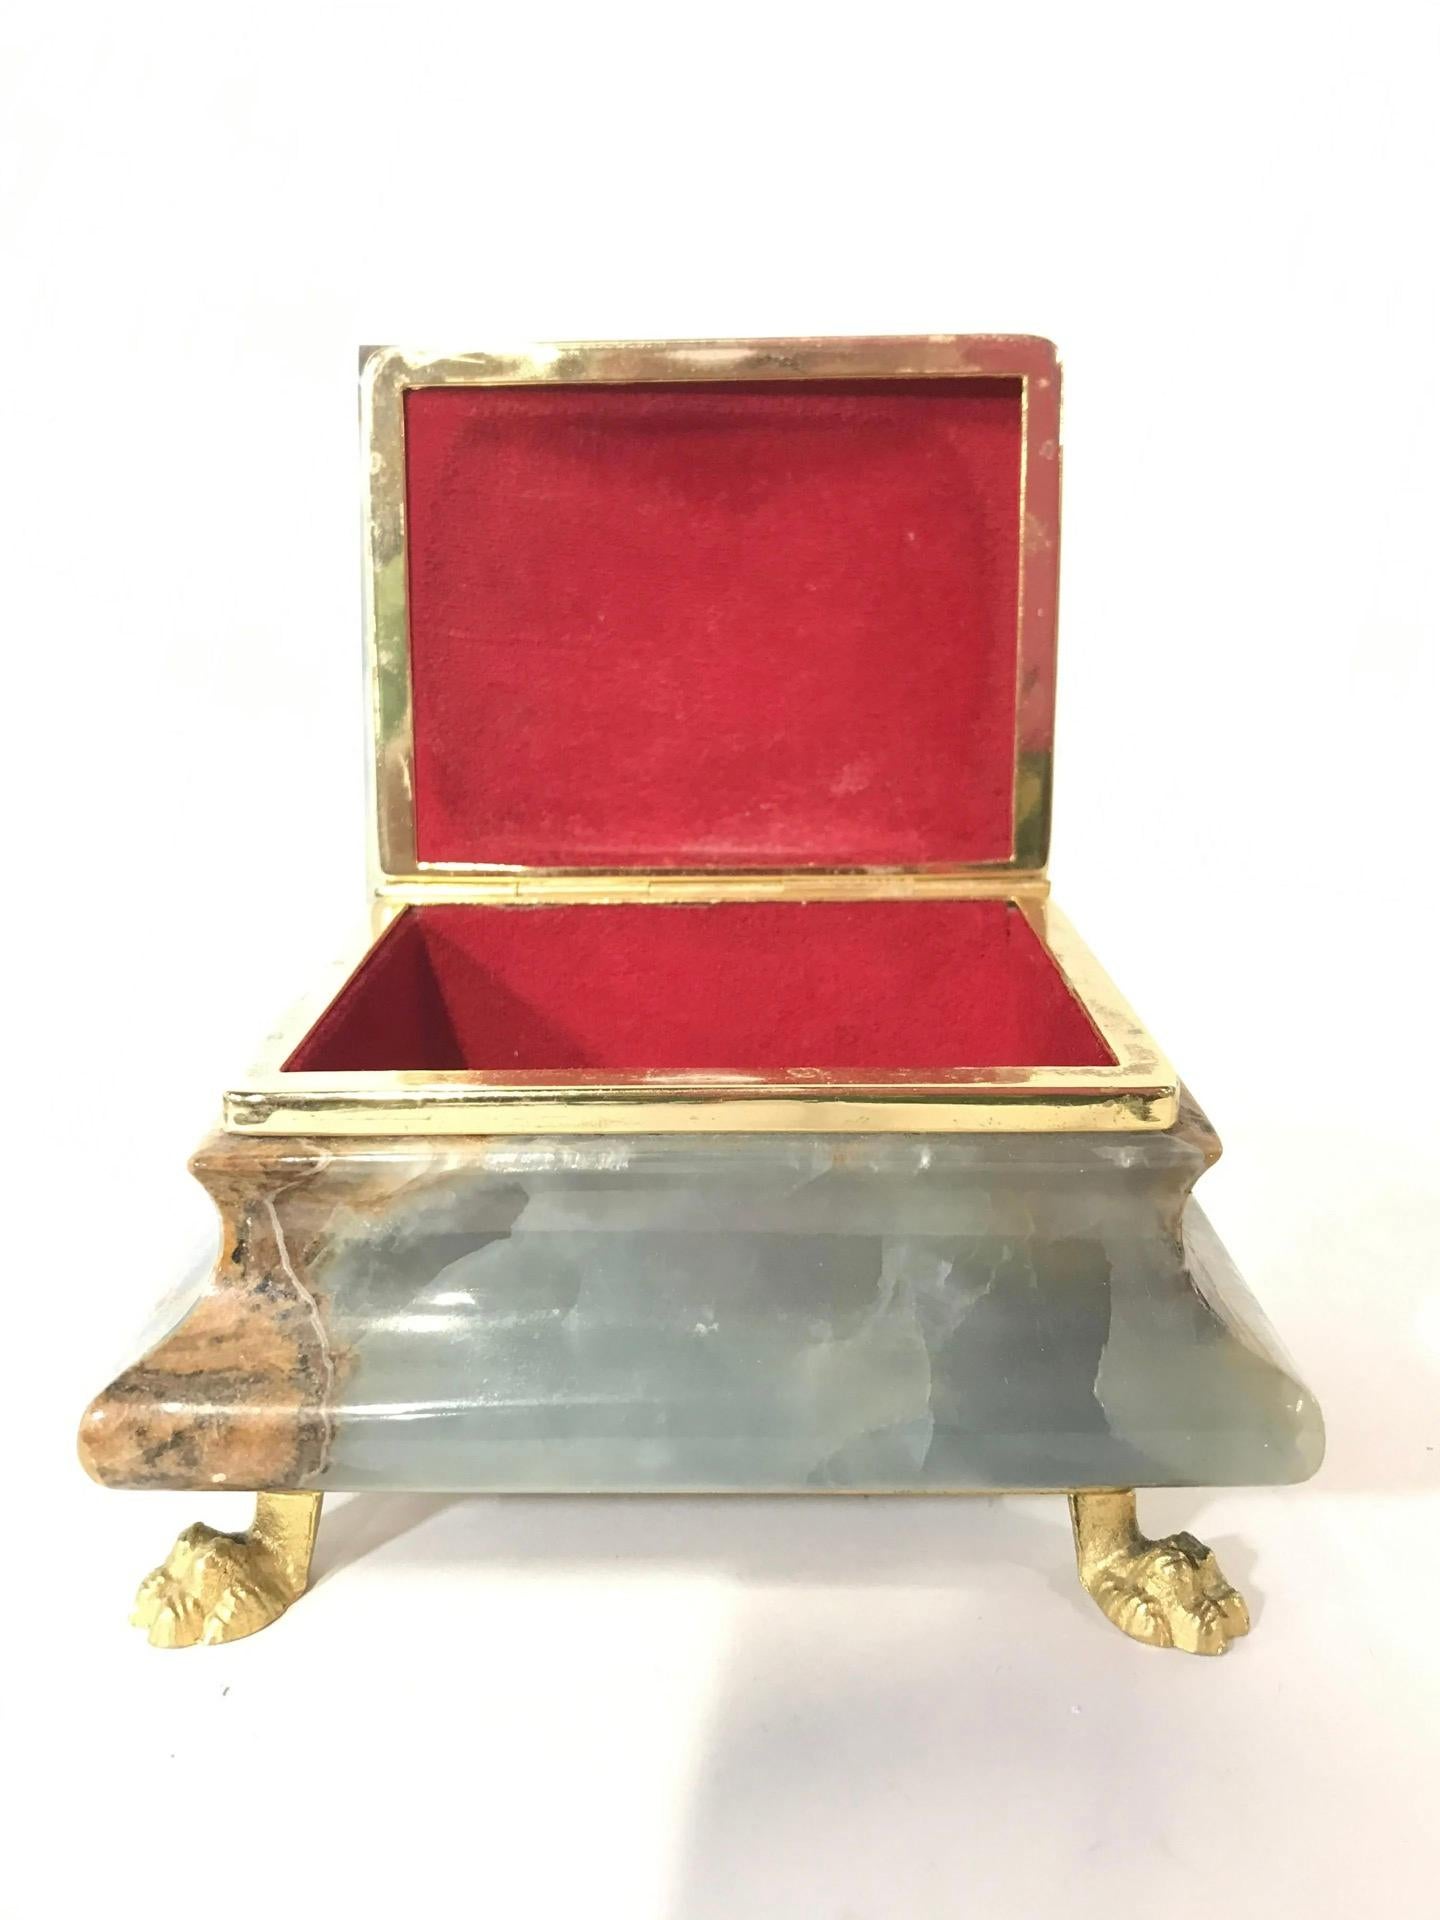 Wonderfully decorative to keep your jewelry or trinkets in. This keepsake box has gold toned claw style feet. Interior is lined with red toned fabric. Box measures approximately 5 inches long 4 inches deep 3 inches tall. 
Keepsake box, trinket box,